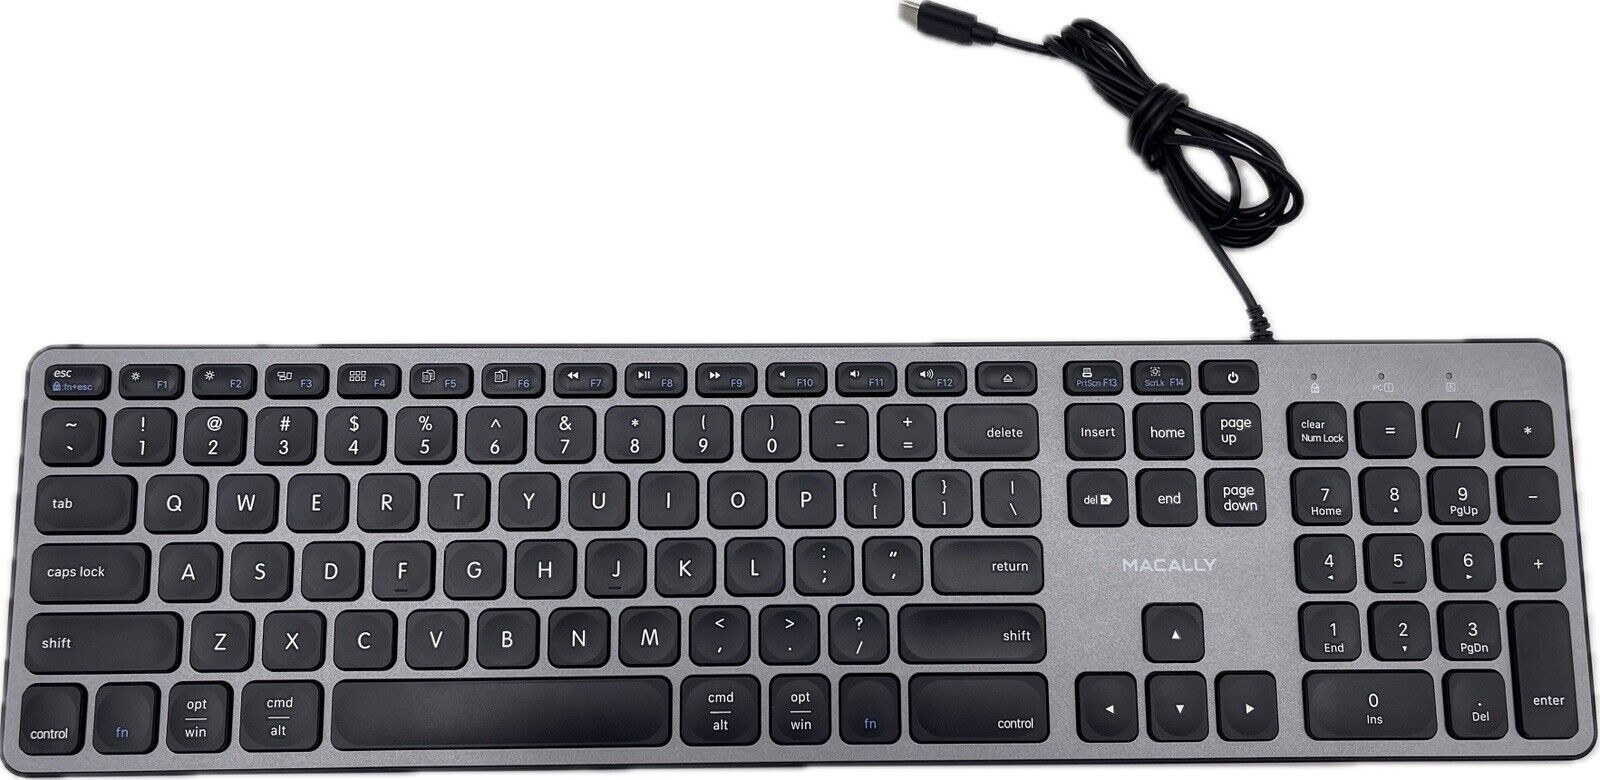 Macally UCZKEYHUBACSG, USB C Keyboard | USB Hub for Mac, Connect Up to 3 Devices